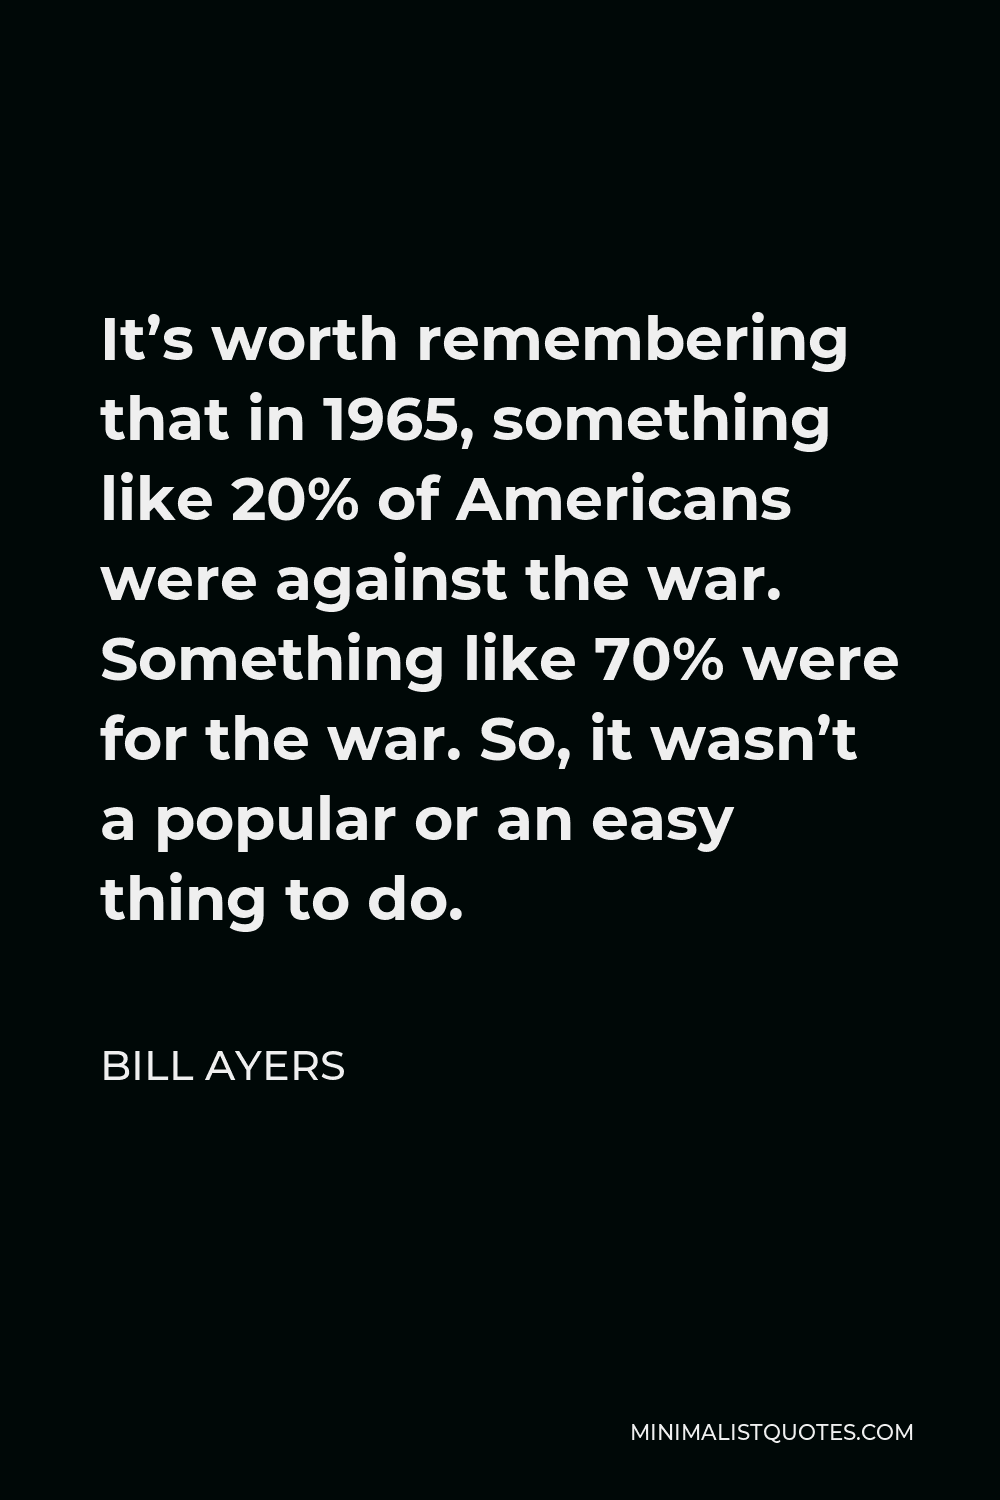 Bill Ayers Quote - It’s worth remembering that in 1965, something like 20% of Americans were against the war. Something like 70% were for the war. So, it wasn’t a popular or an easy thing to do.